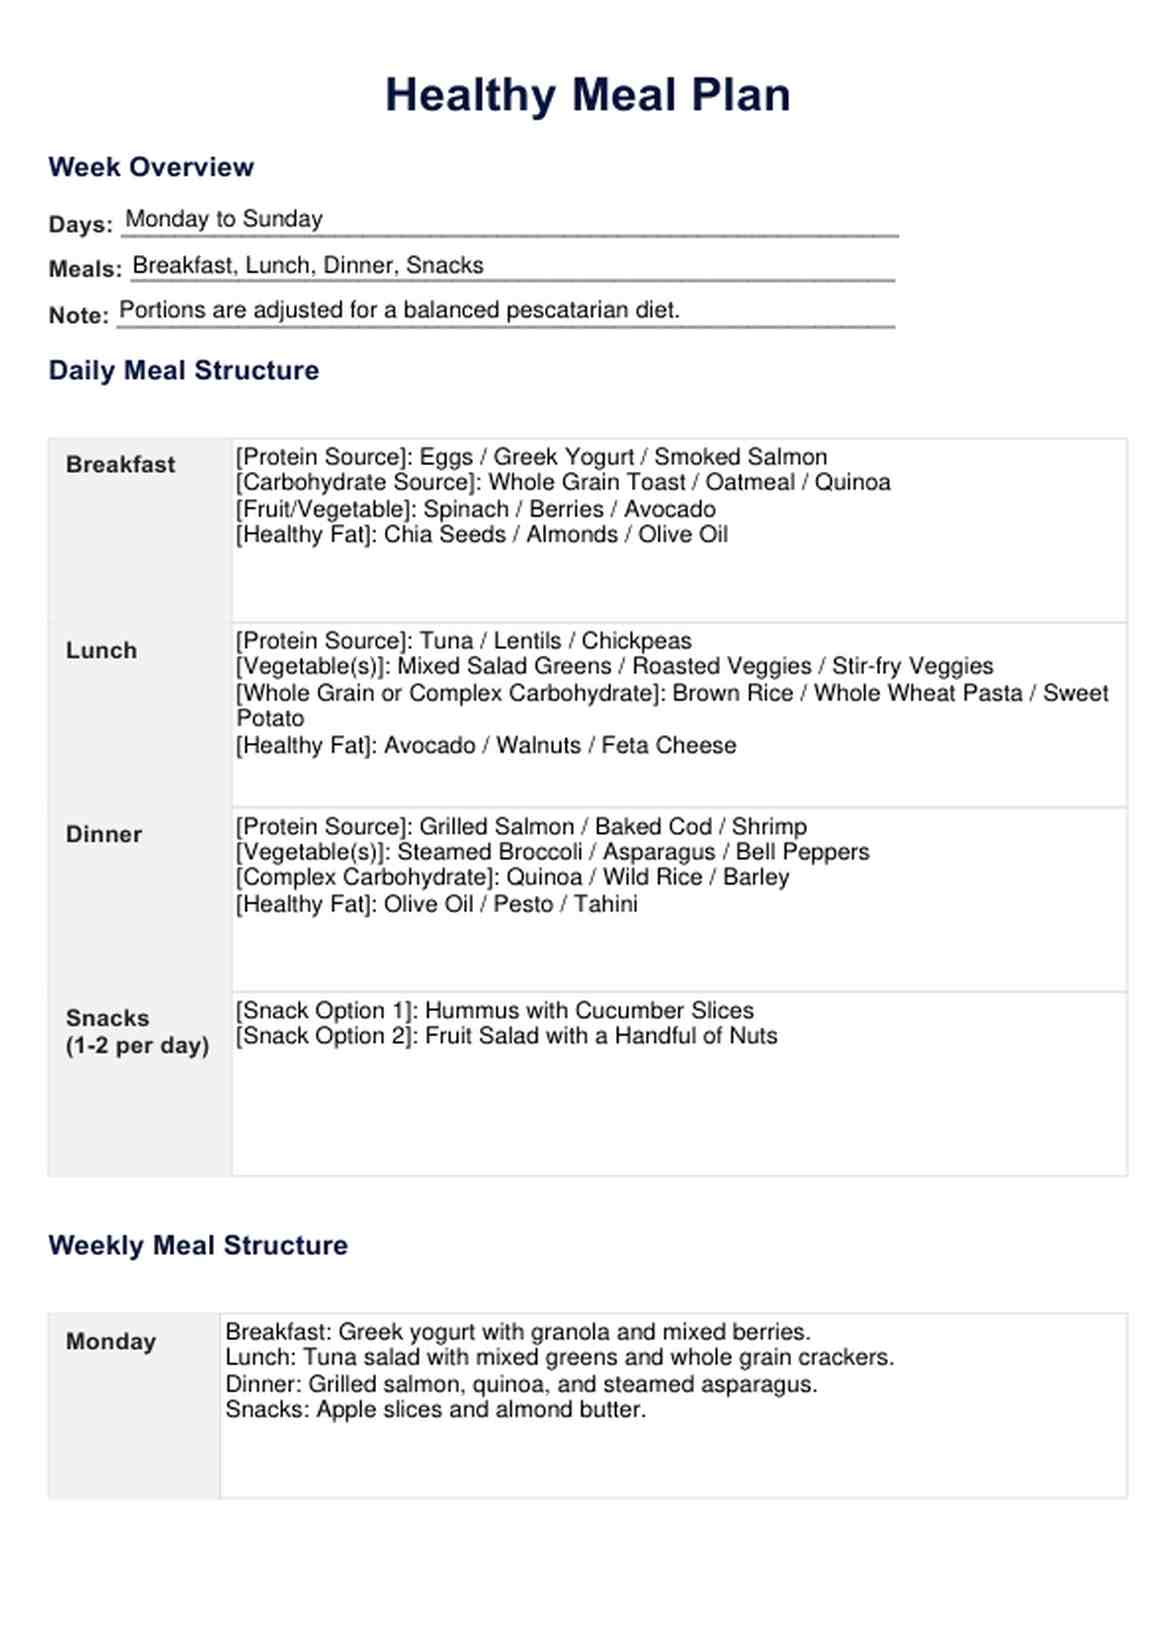 Healthy Meal Plan PDF Example